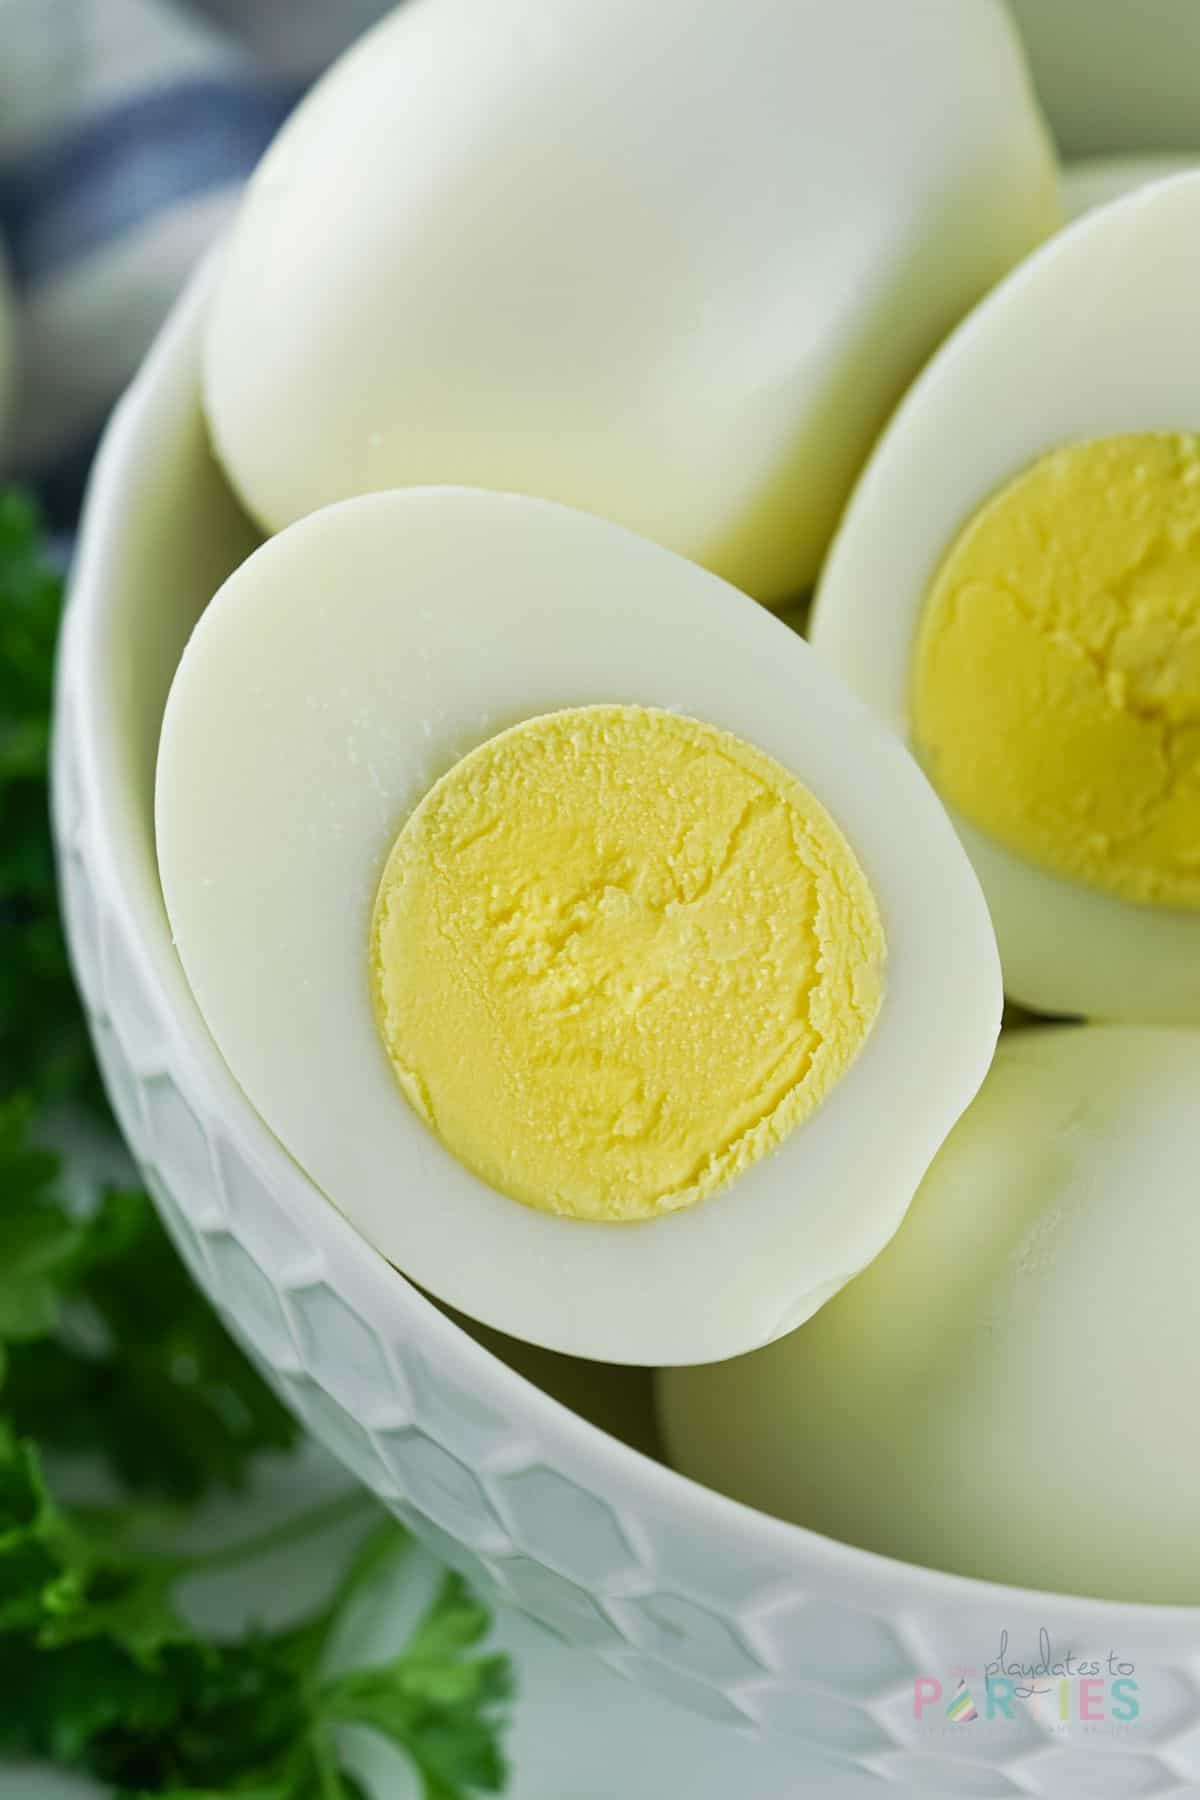 Close up of a hard boiled egg cut in half that has no green around the yolk.